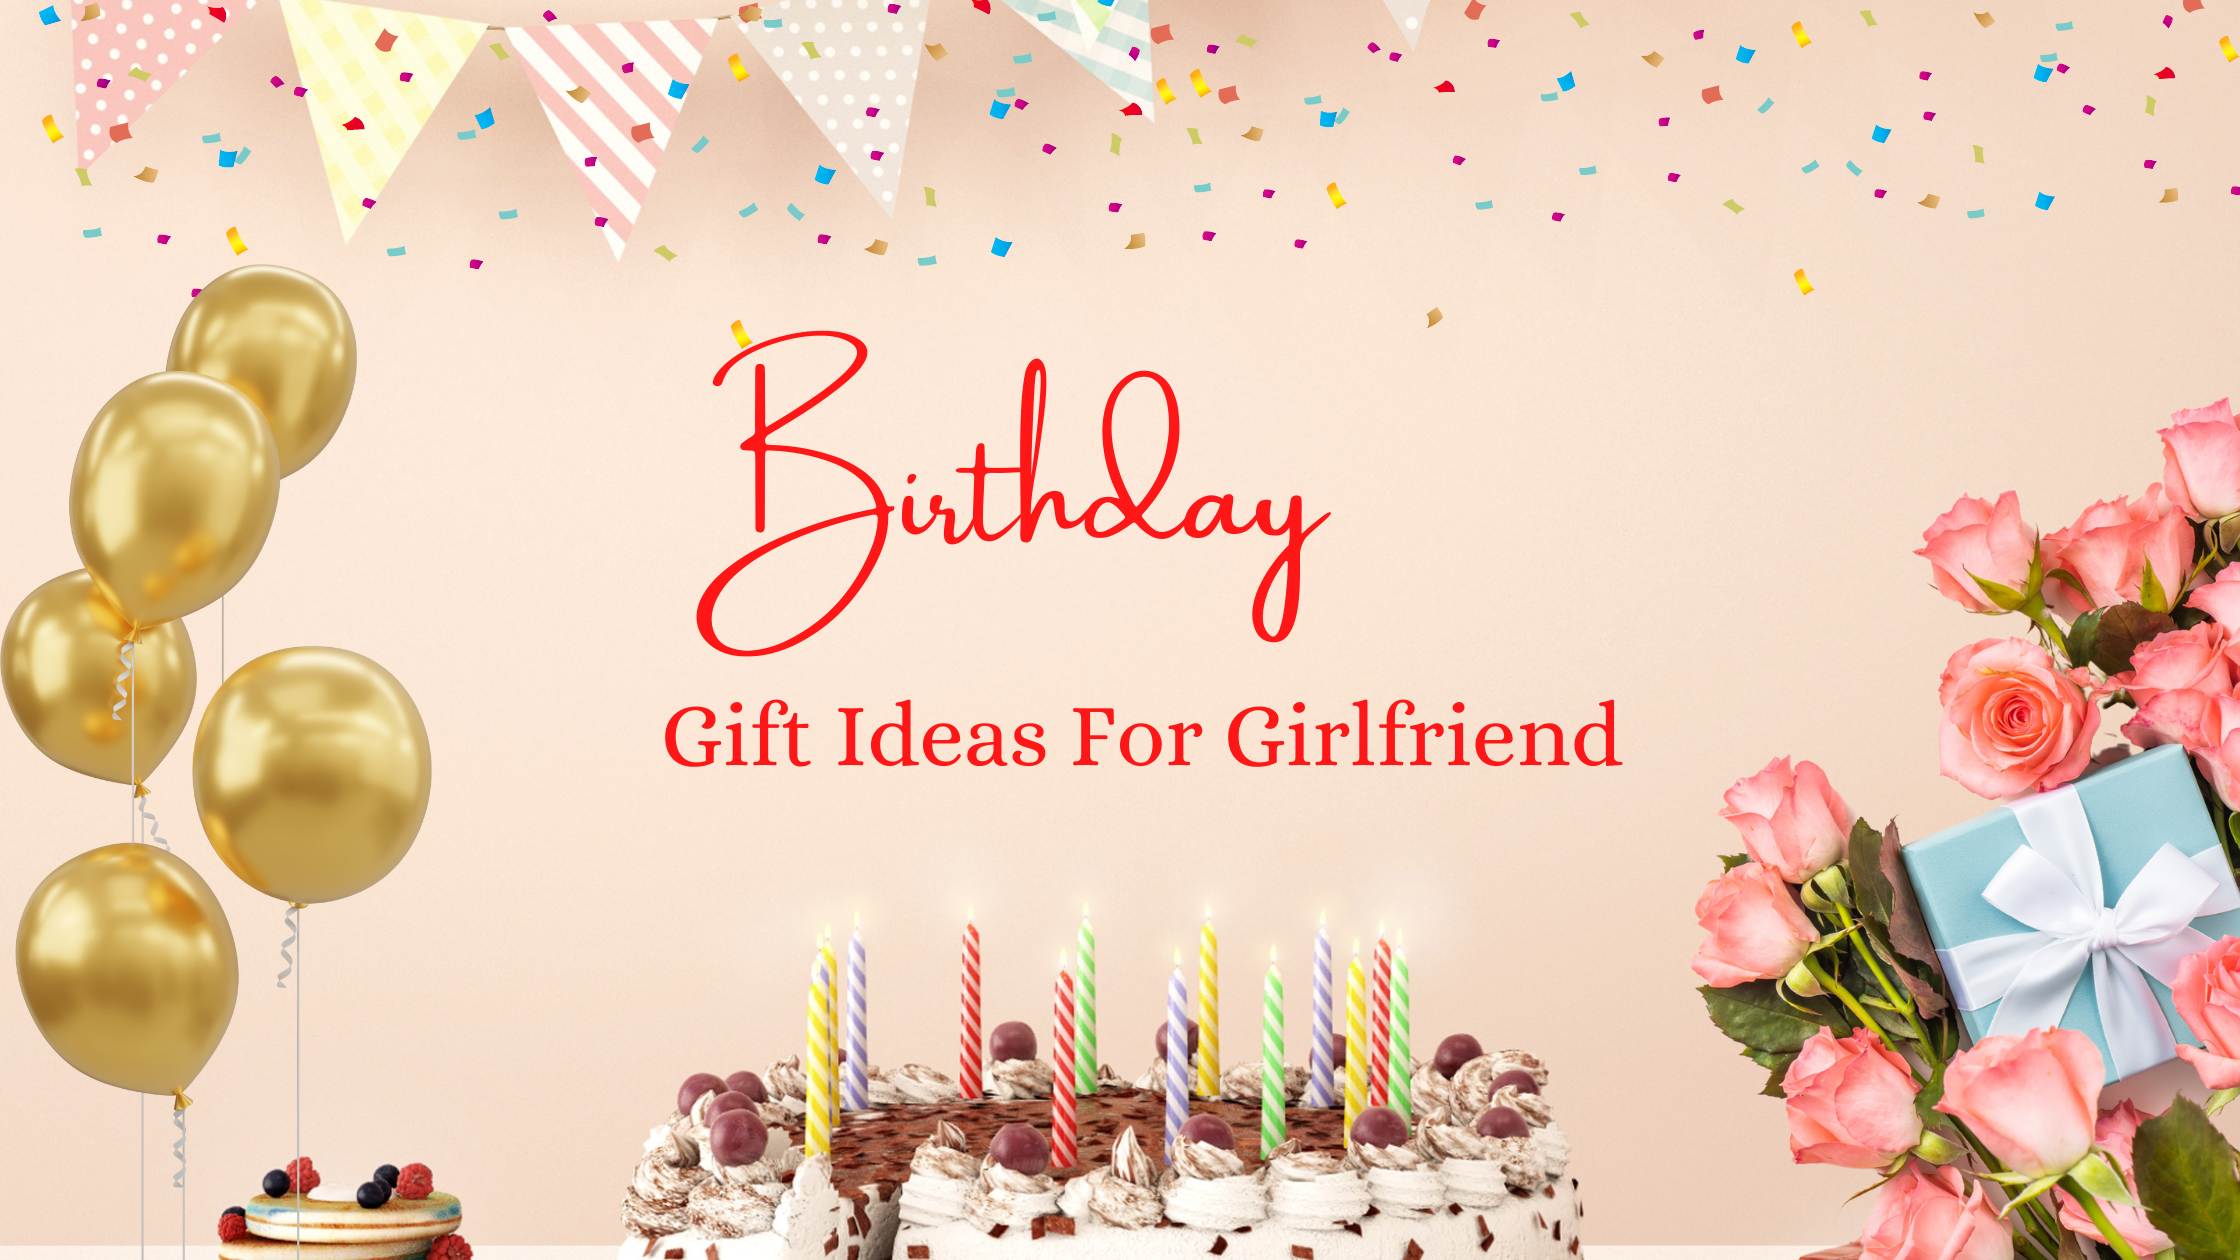 PRIME GIFTS BEST GIFT FOR A GIRL ON BIRHDAY / BIRTHDAY GIFT FOR GIRLFRIEND